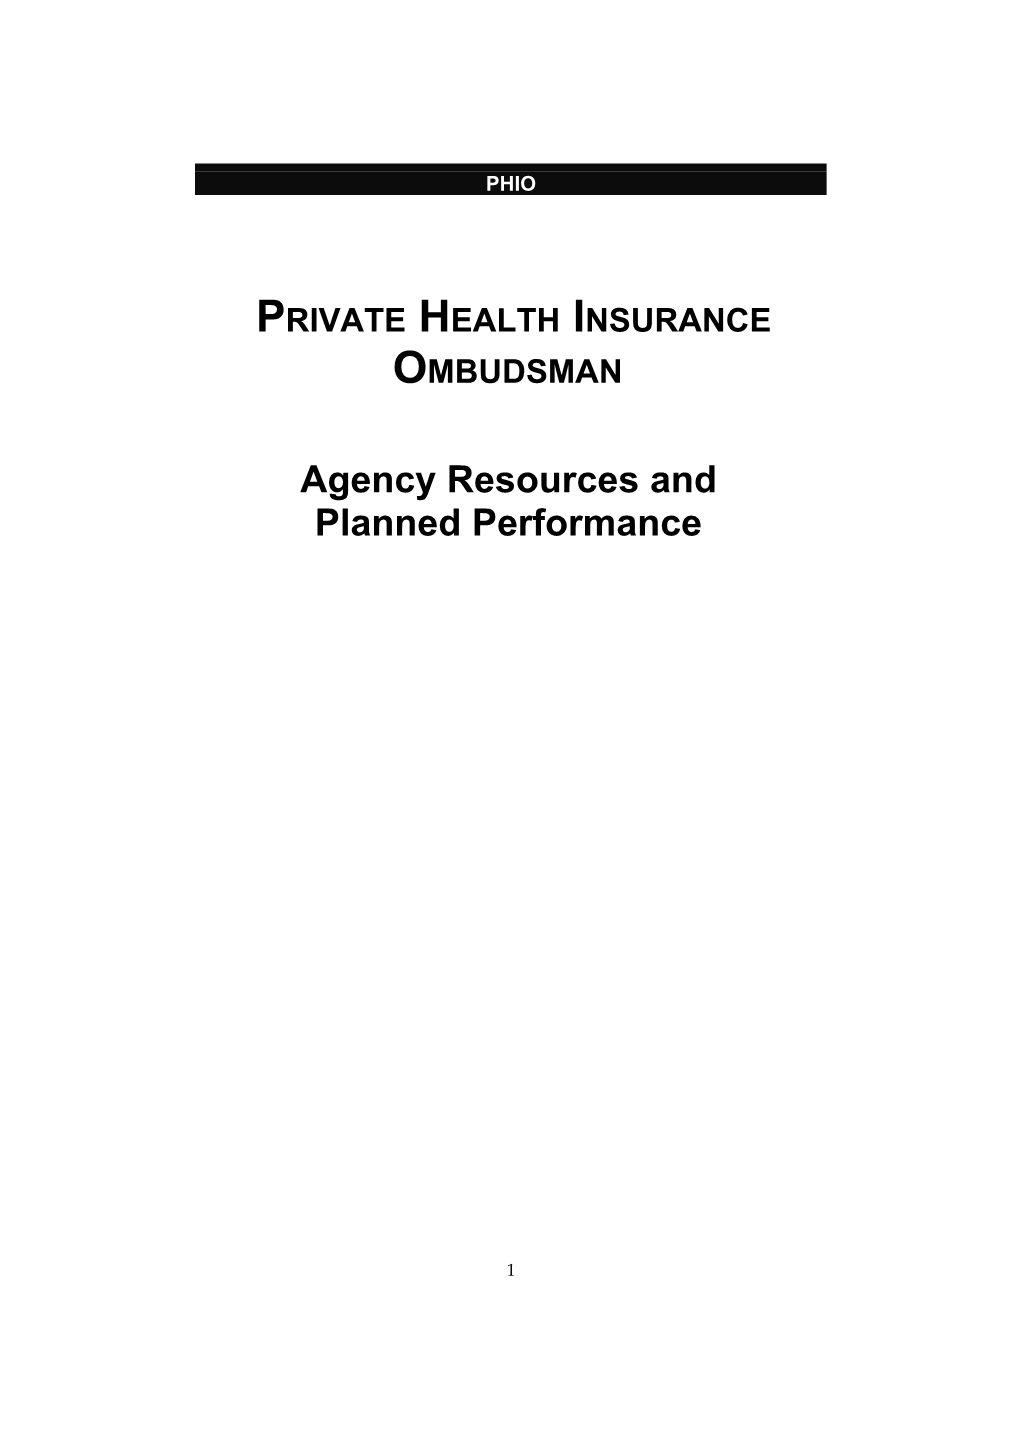 PRIVATE HEALTH INSURANCE OMBUDSMAN Agency Resources and Planned Performance